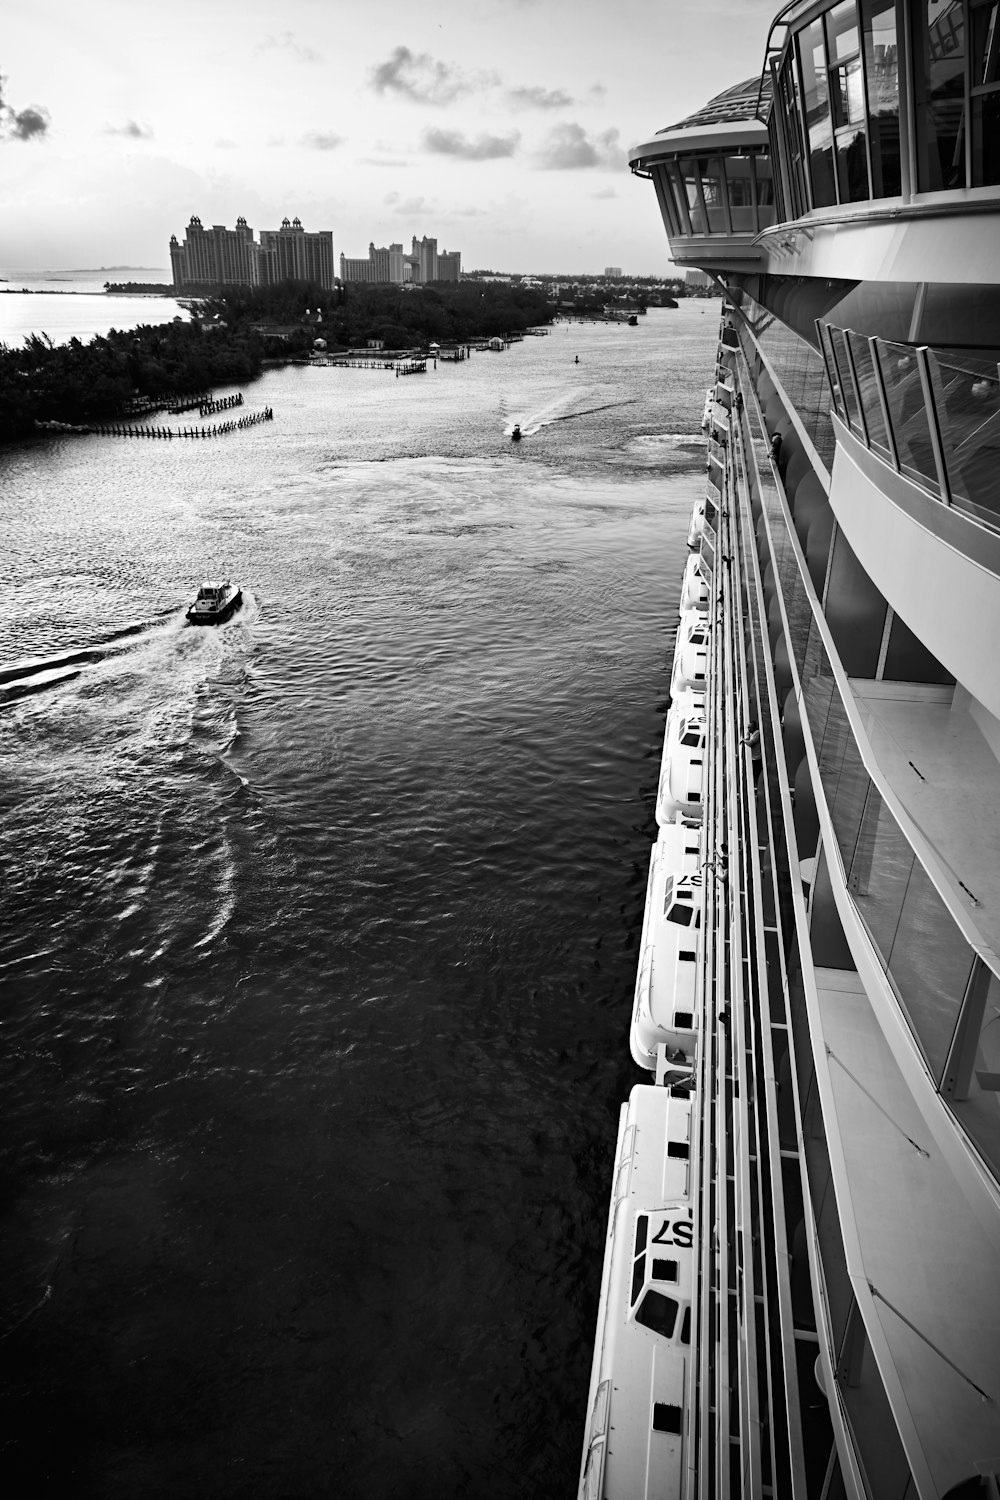 a black and white photo of a cruise ship